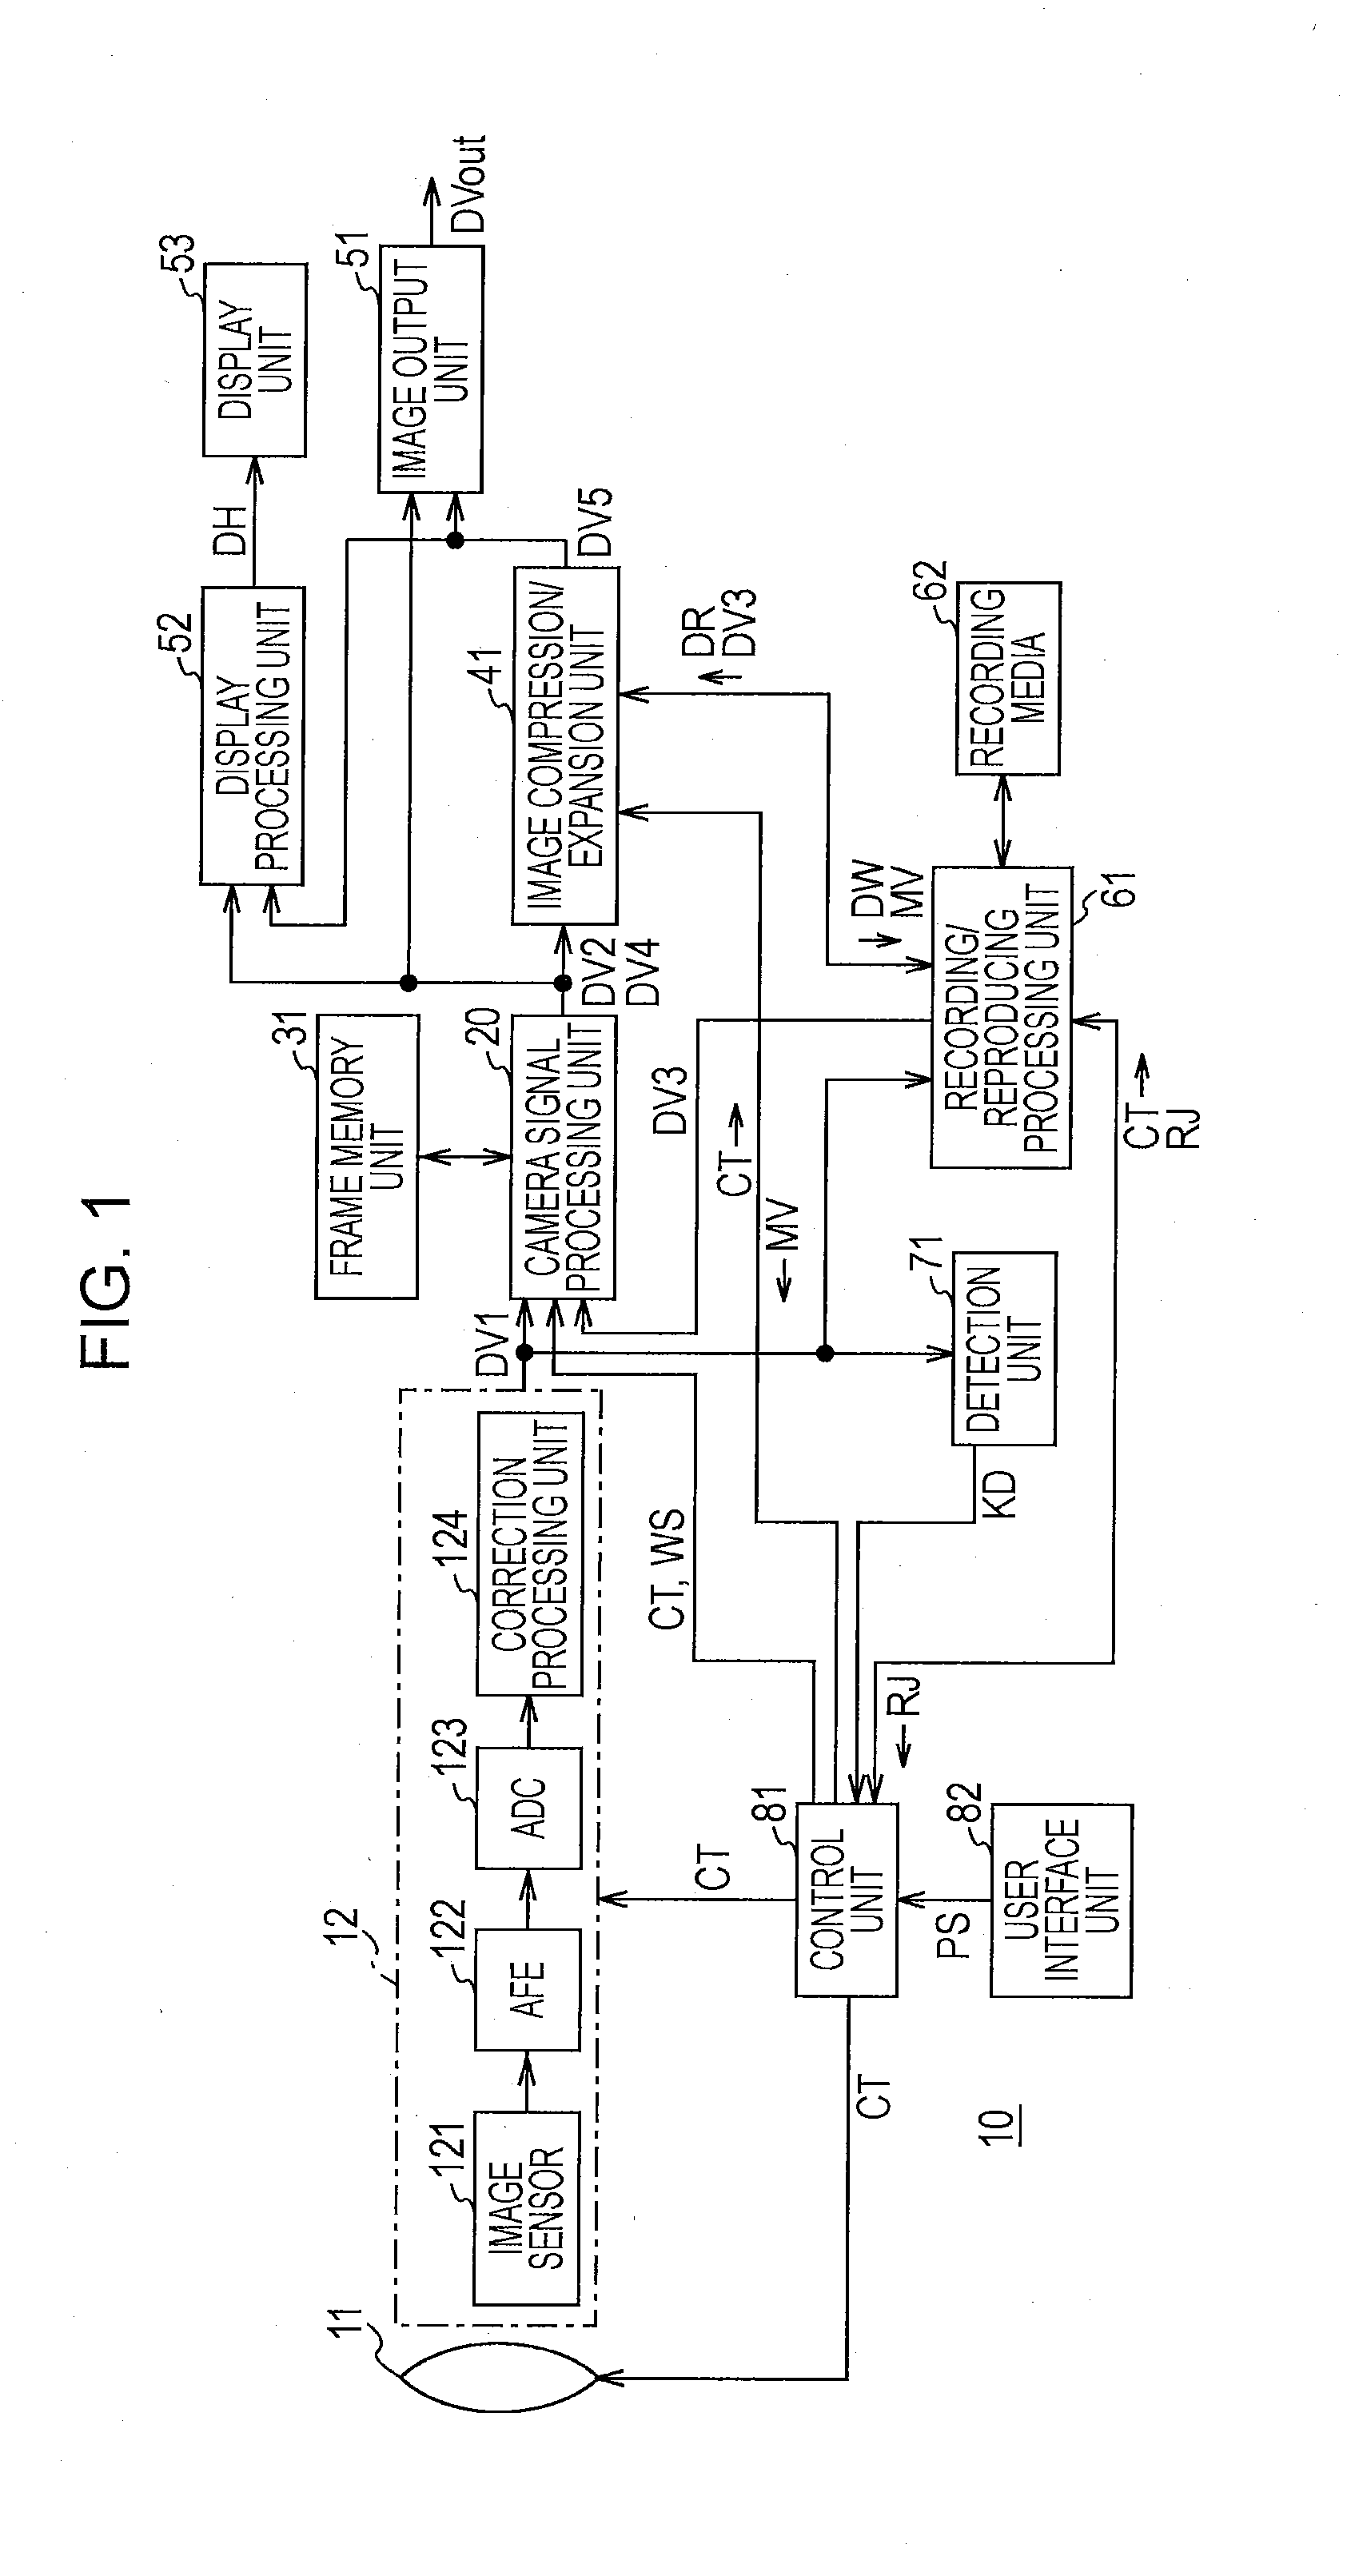 Image reproducing apparatus, image reproducing method, image capturing apparatus, and control method therefor